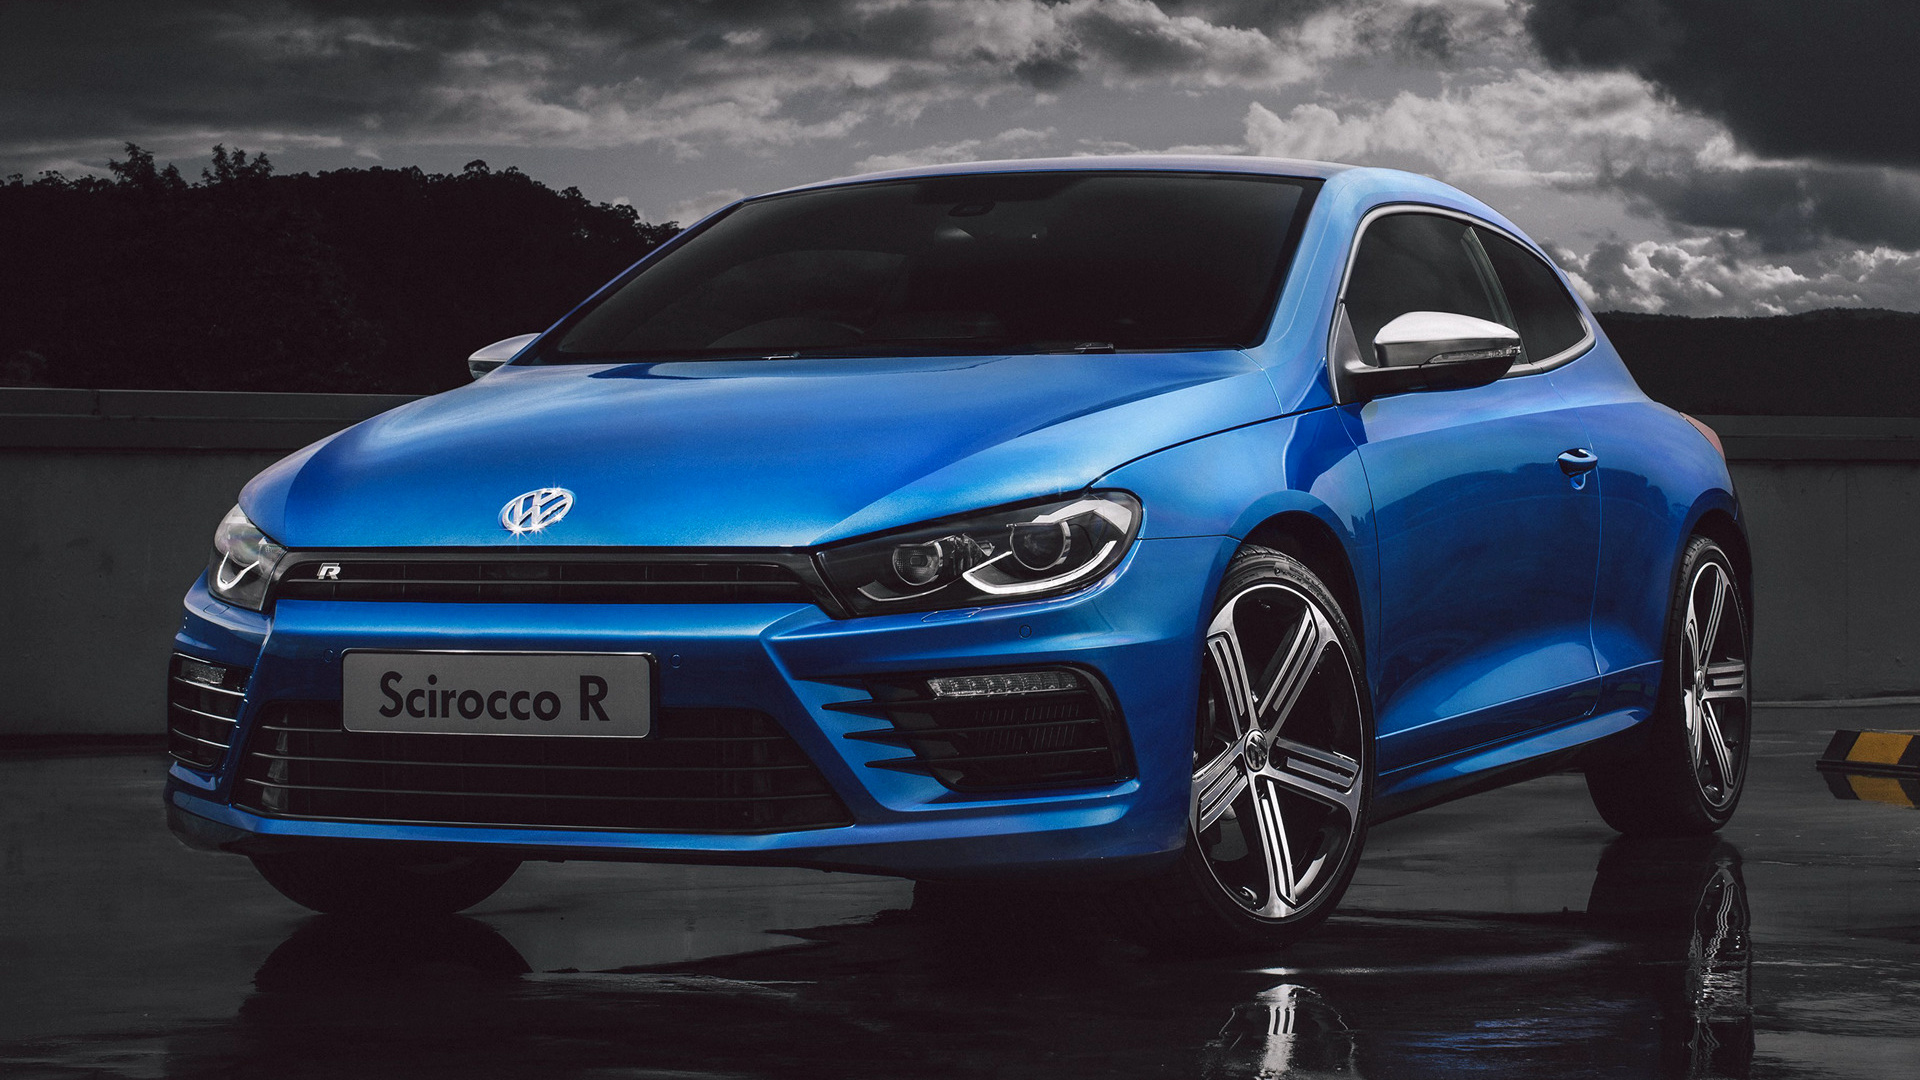 2014 Volkswagen Scirocco R (AU) - Wallpapers and HD Images ...